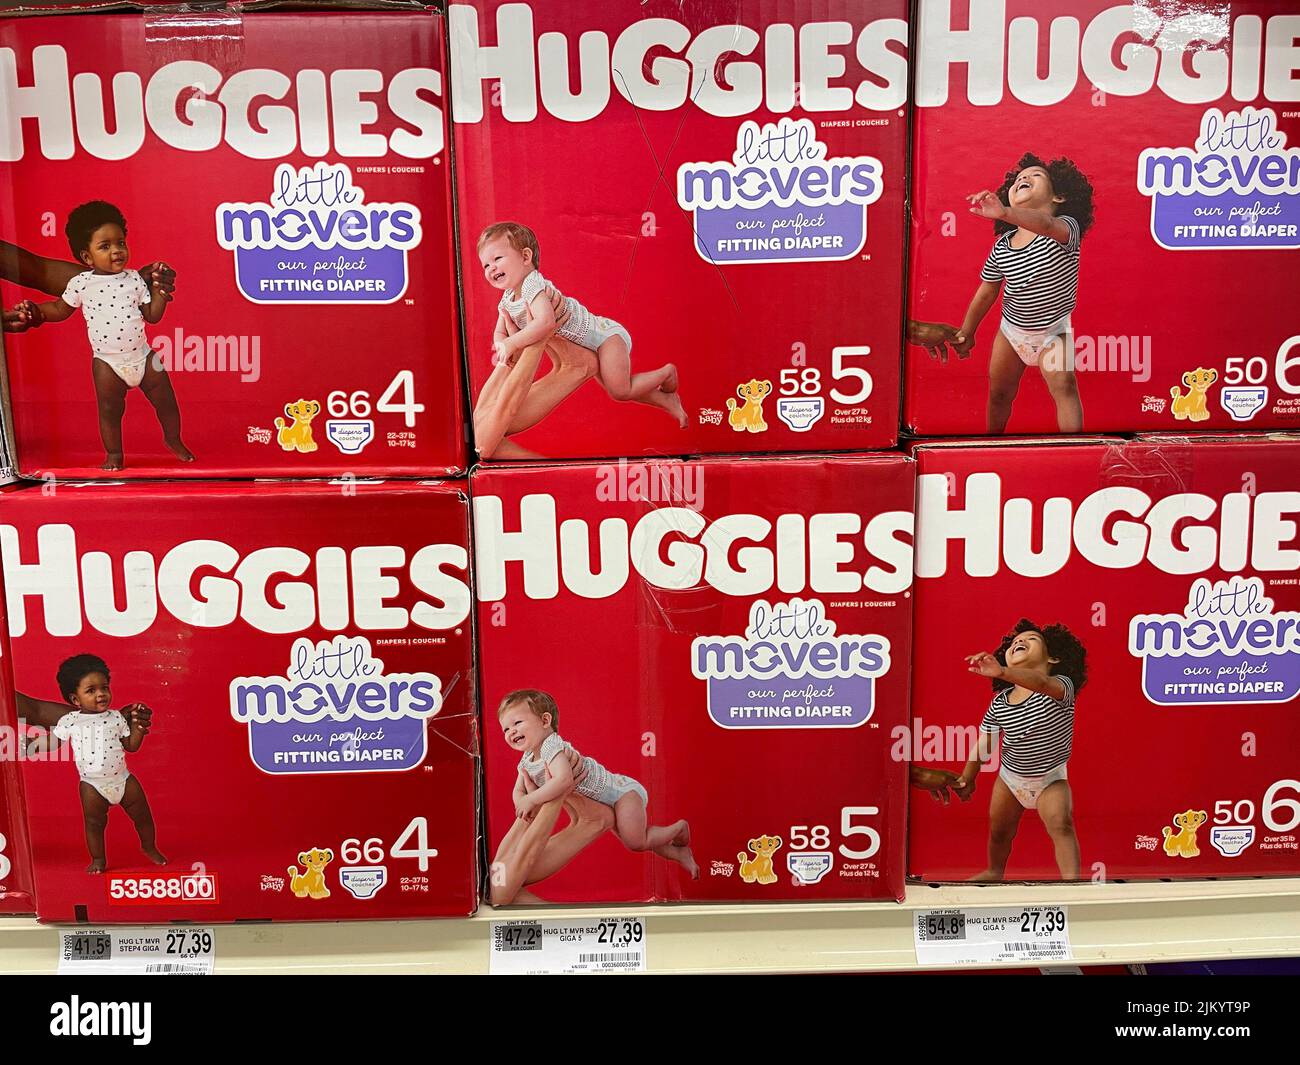 Huggies diapers and wipes – Stock Editorial Photo © homank76